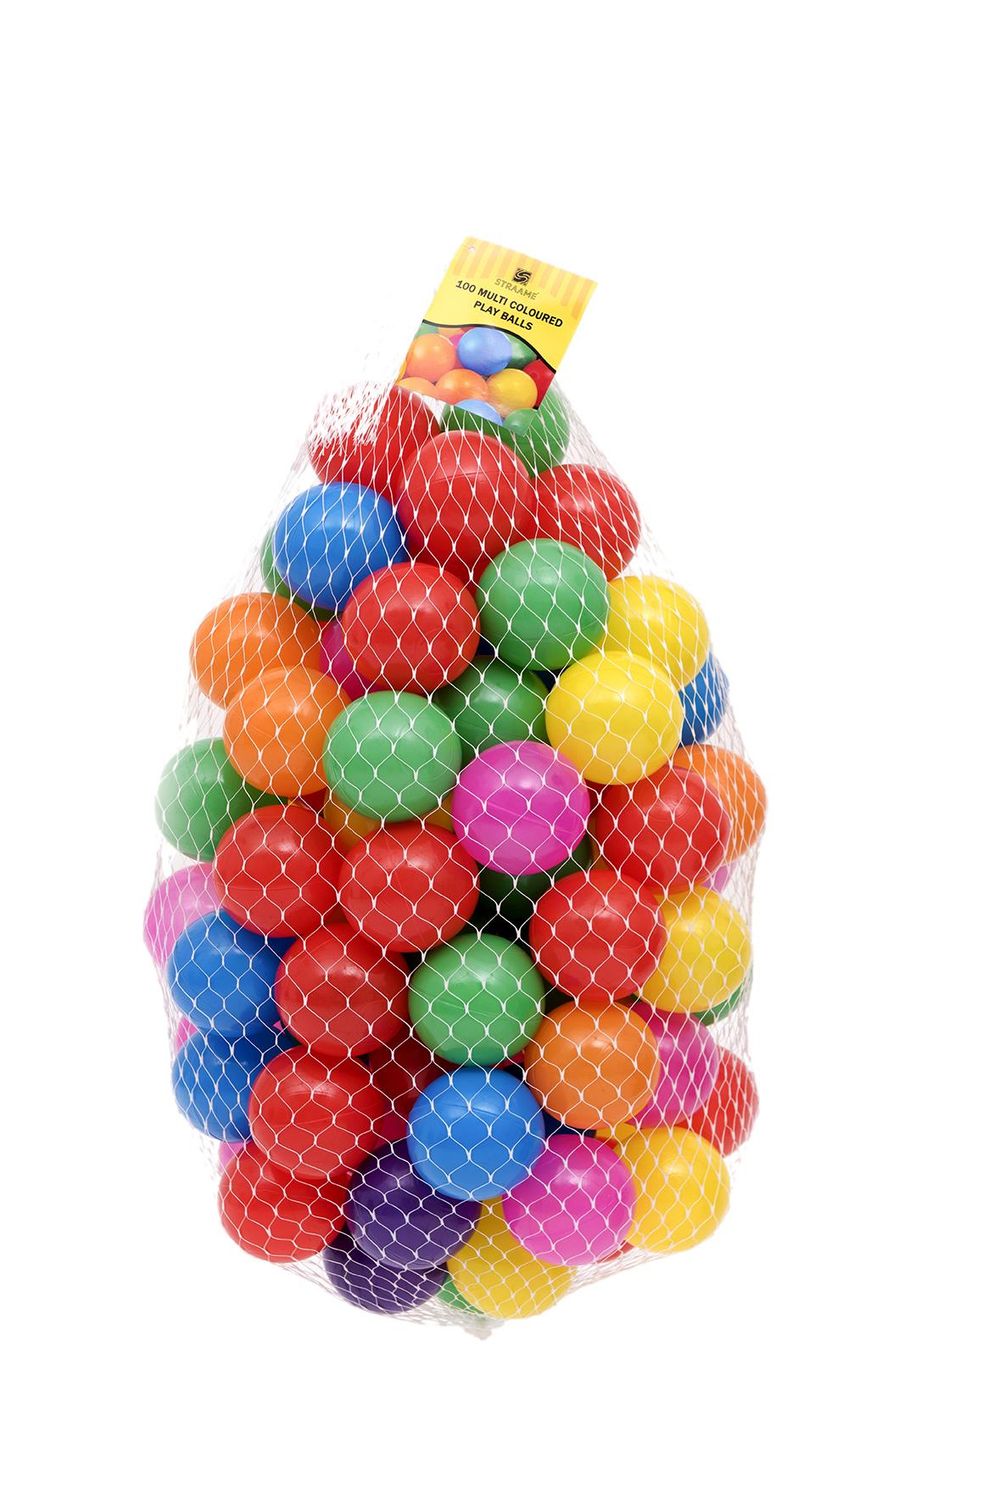 Straame PlayBalls Pit Balls Multicolour Children Fun Times Play Game